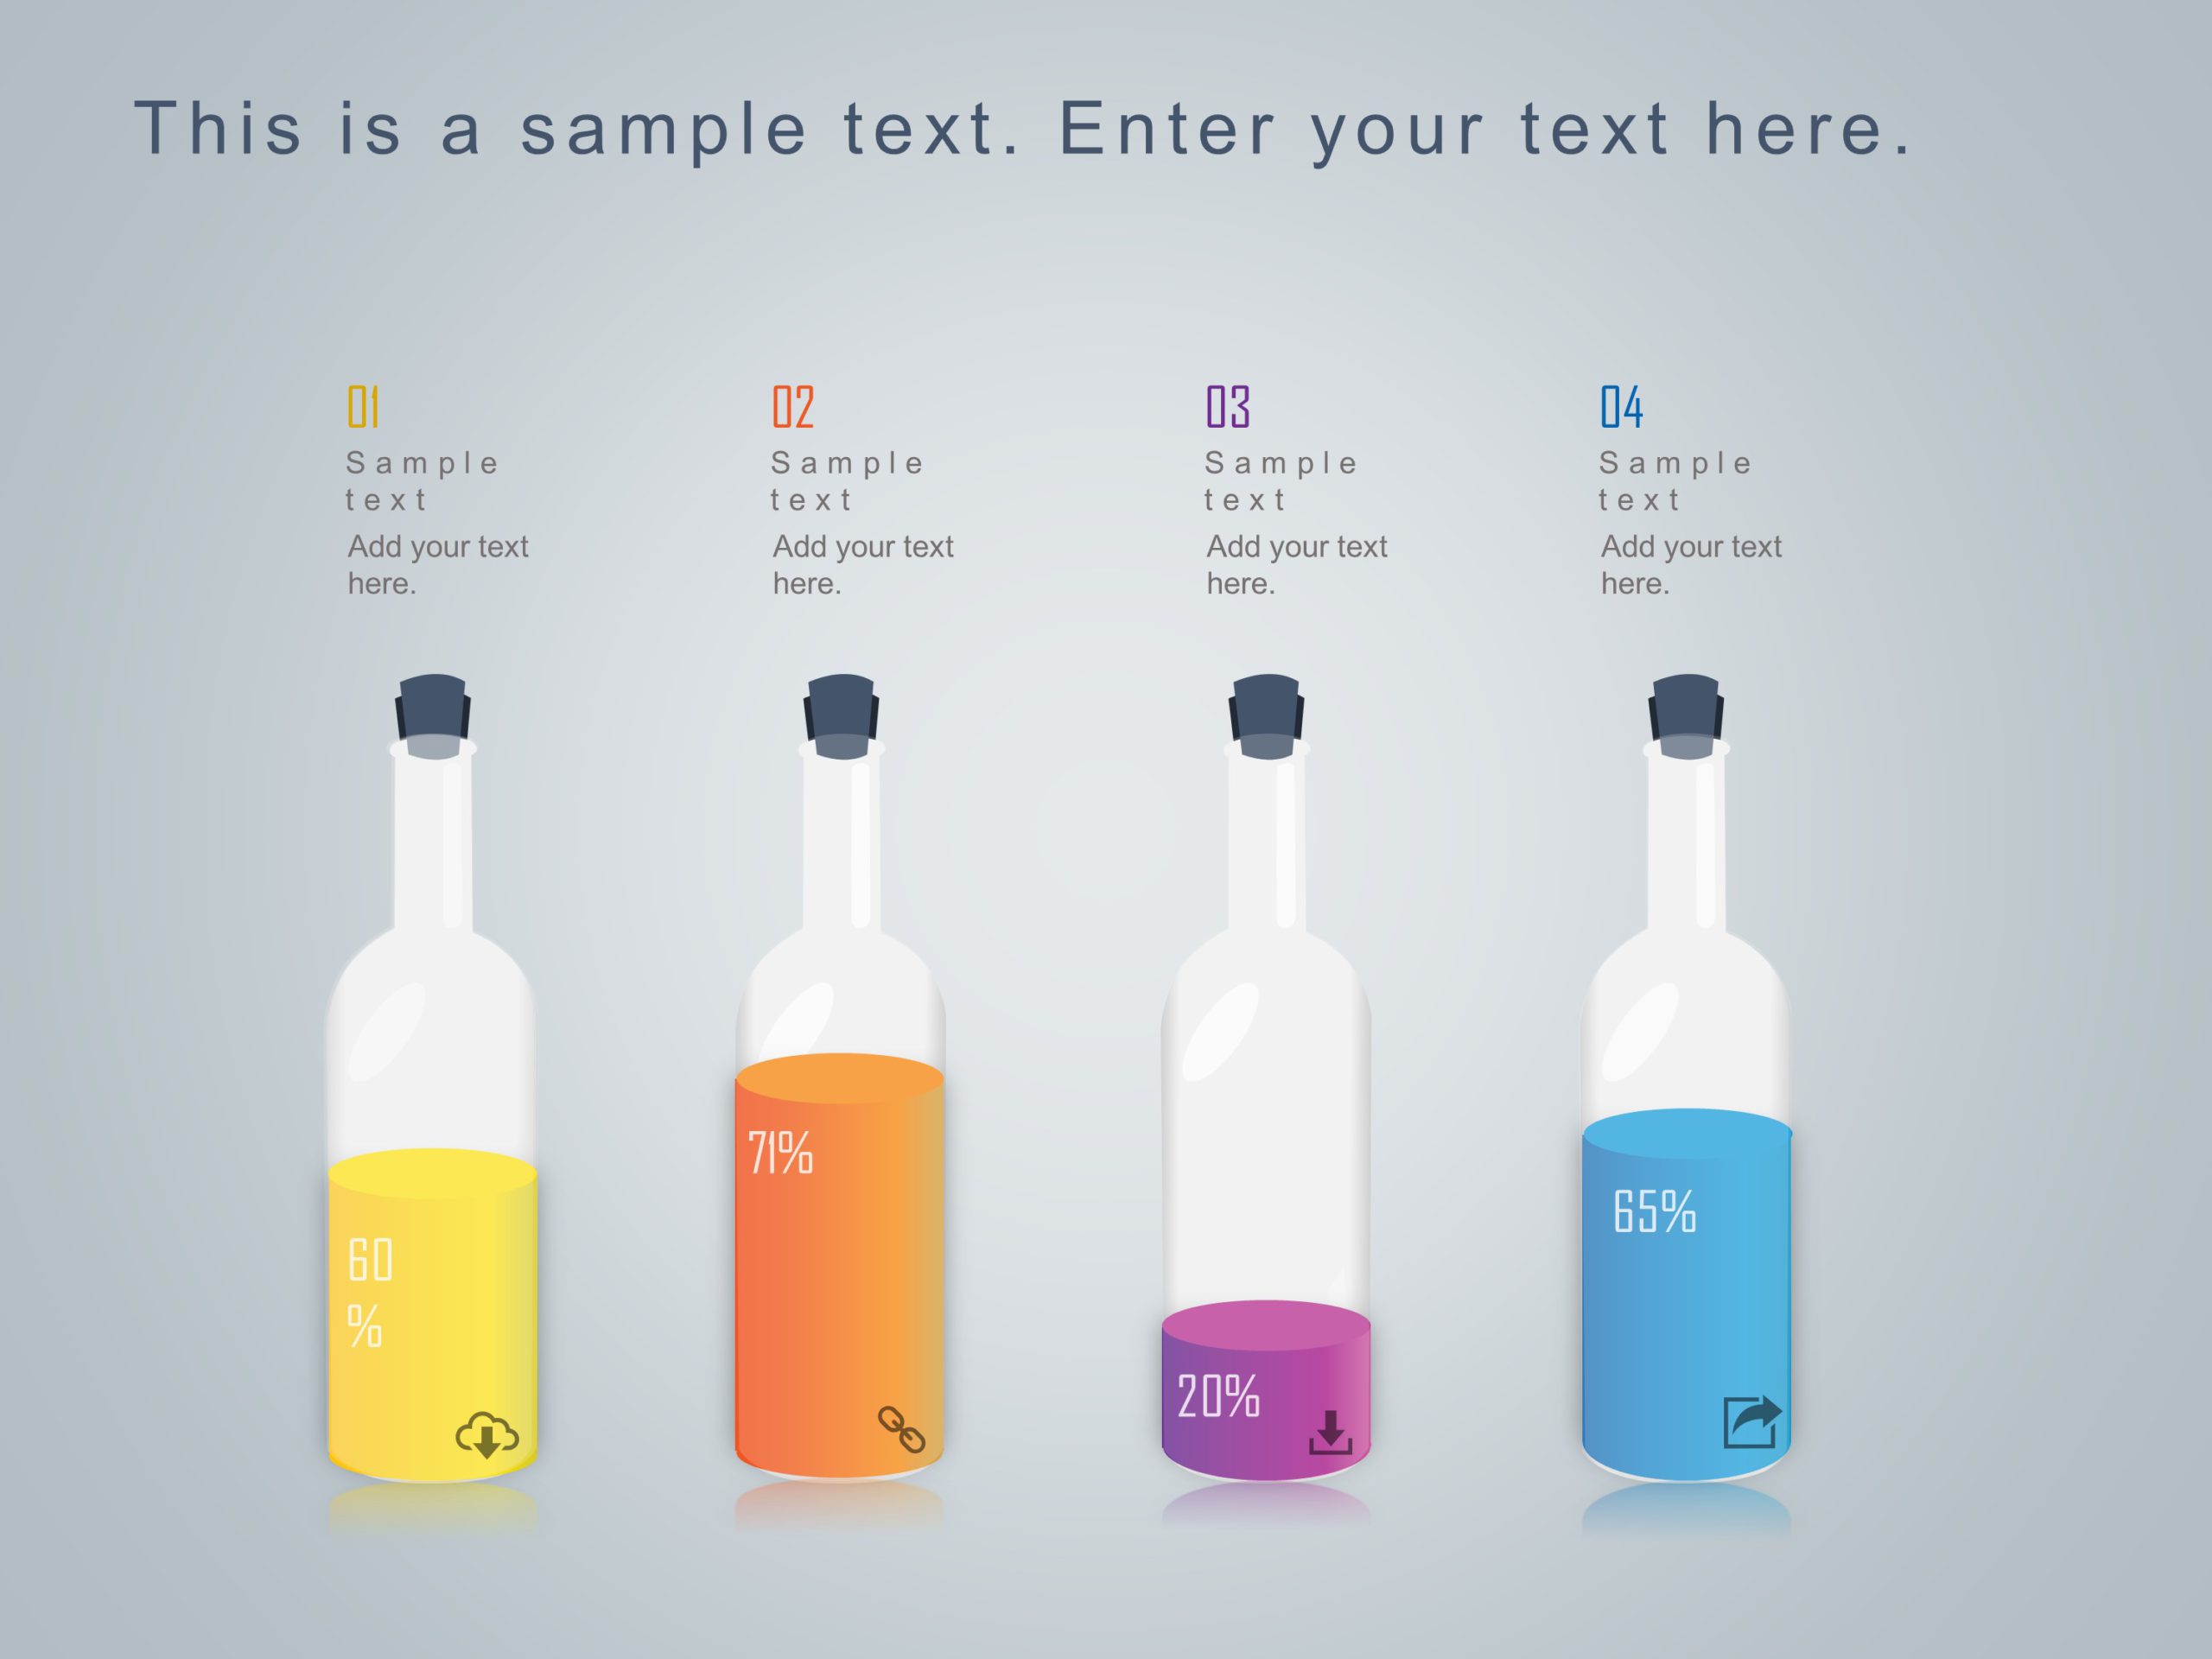 Market Share Bottles Infographic PowerPoint Template